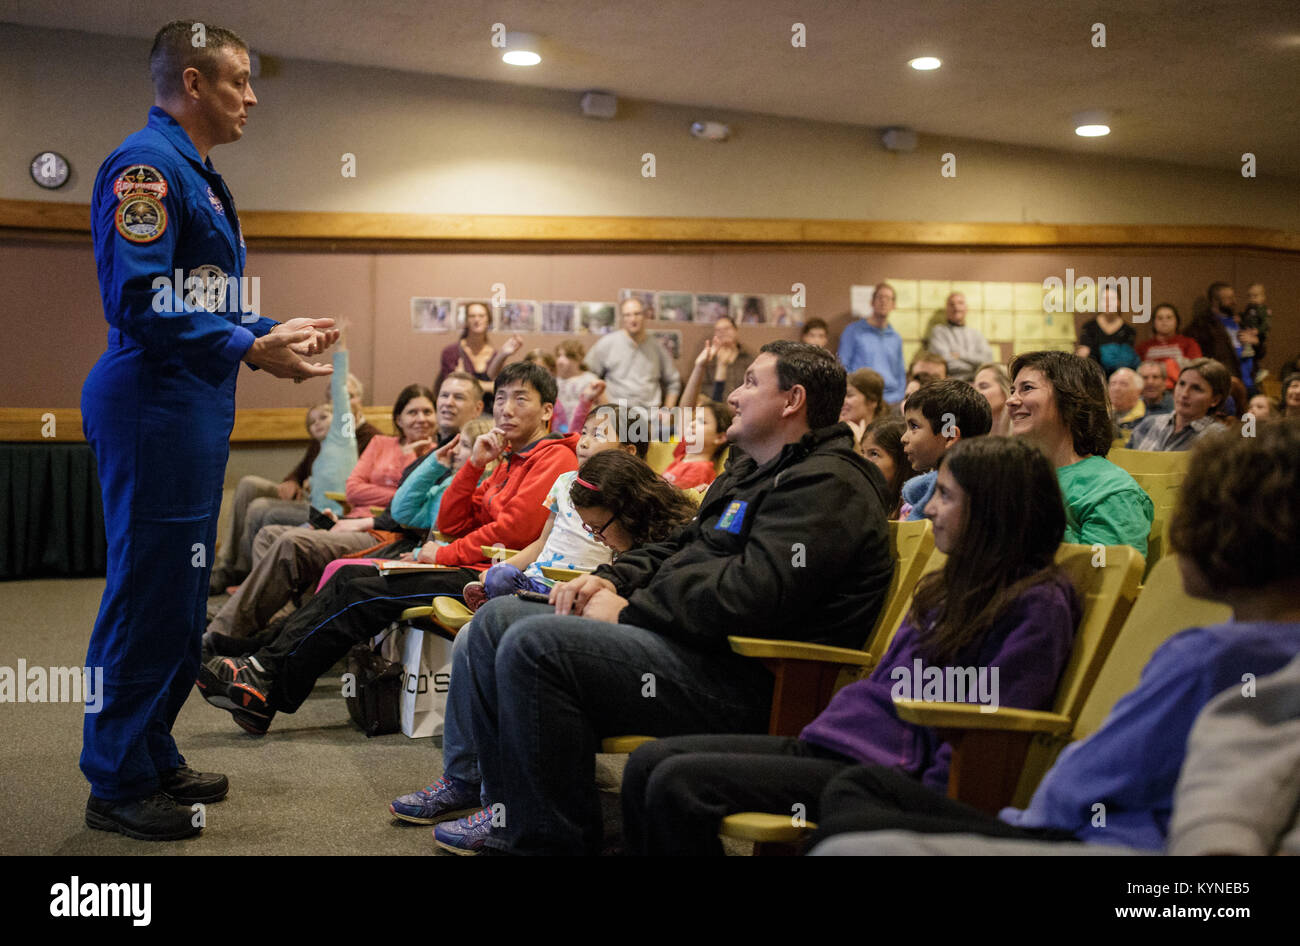 NASA astronaut Jack Fischer answers a question from the audience, Saturday, Nov. 4, 2017 at the Rock Creek Park Nature Center and Planetarium in Washington, DC. During his 136 day mission aboard the ISS, Fischer conducted two spacewalks and hundreds of scientific experiments.  Photo Credit: (NASA/Joel Kowsky) Stock Photo